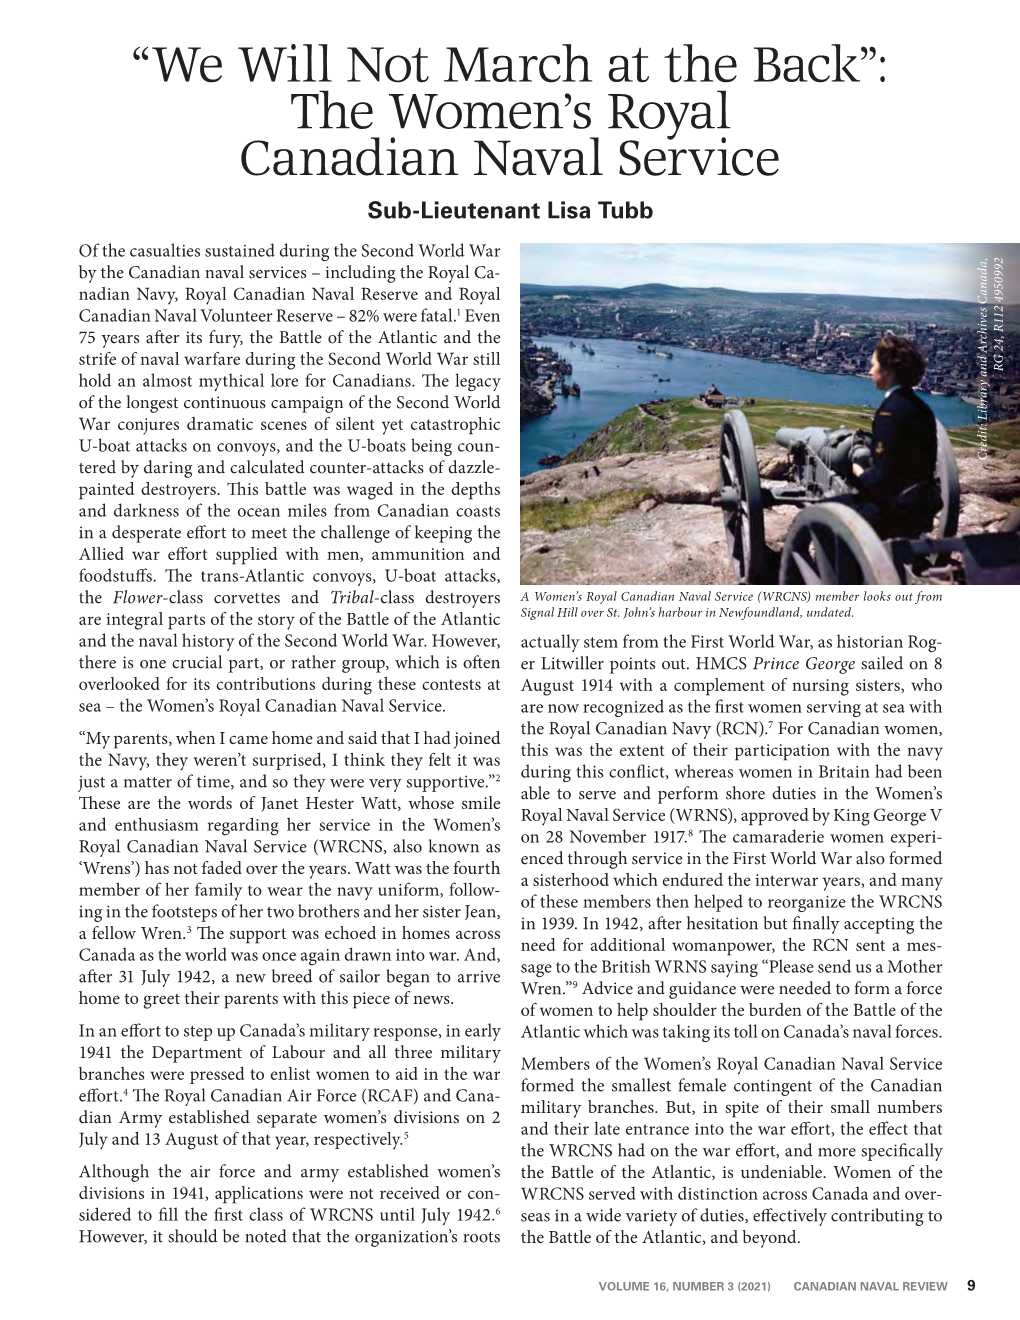 The Women's Royal Canadian Naval Service